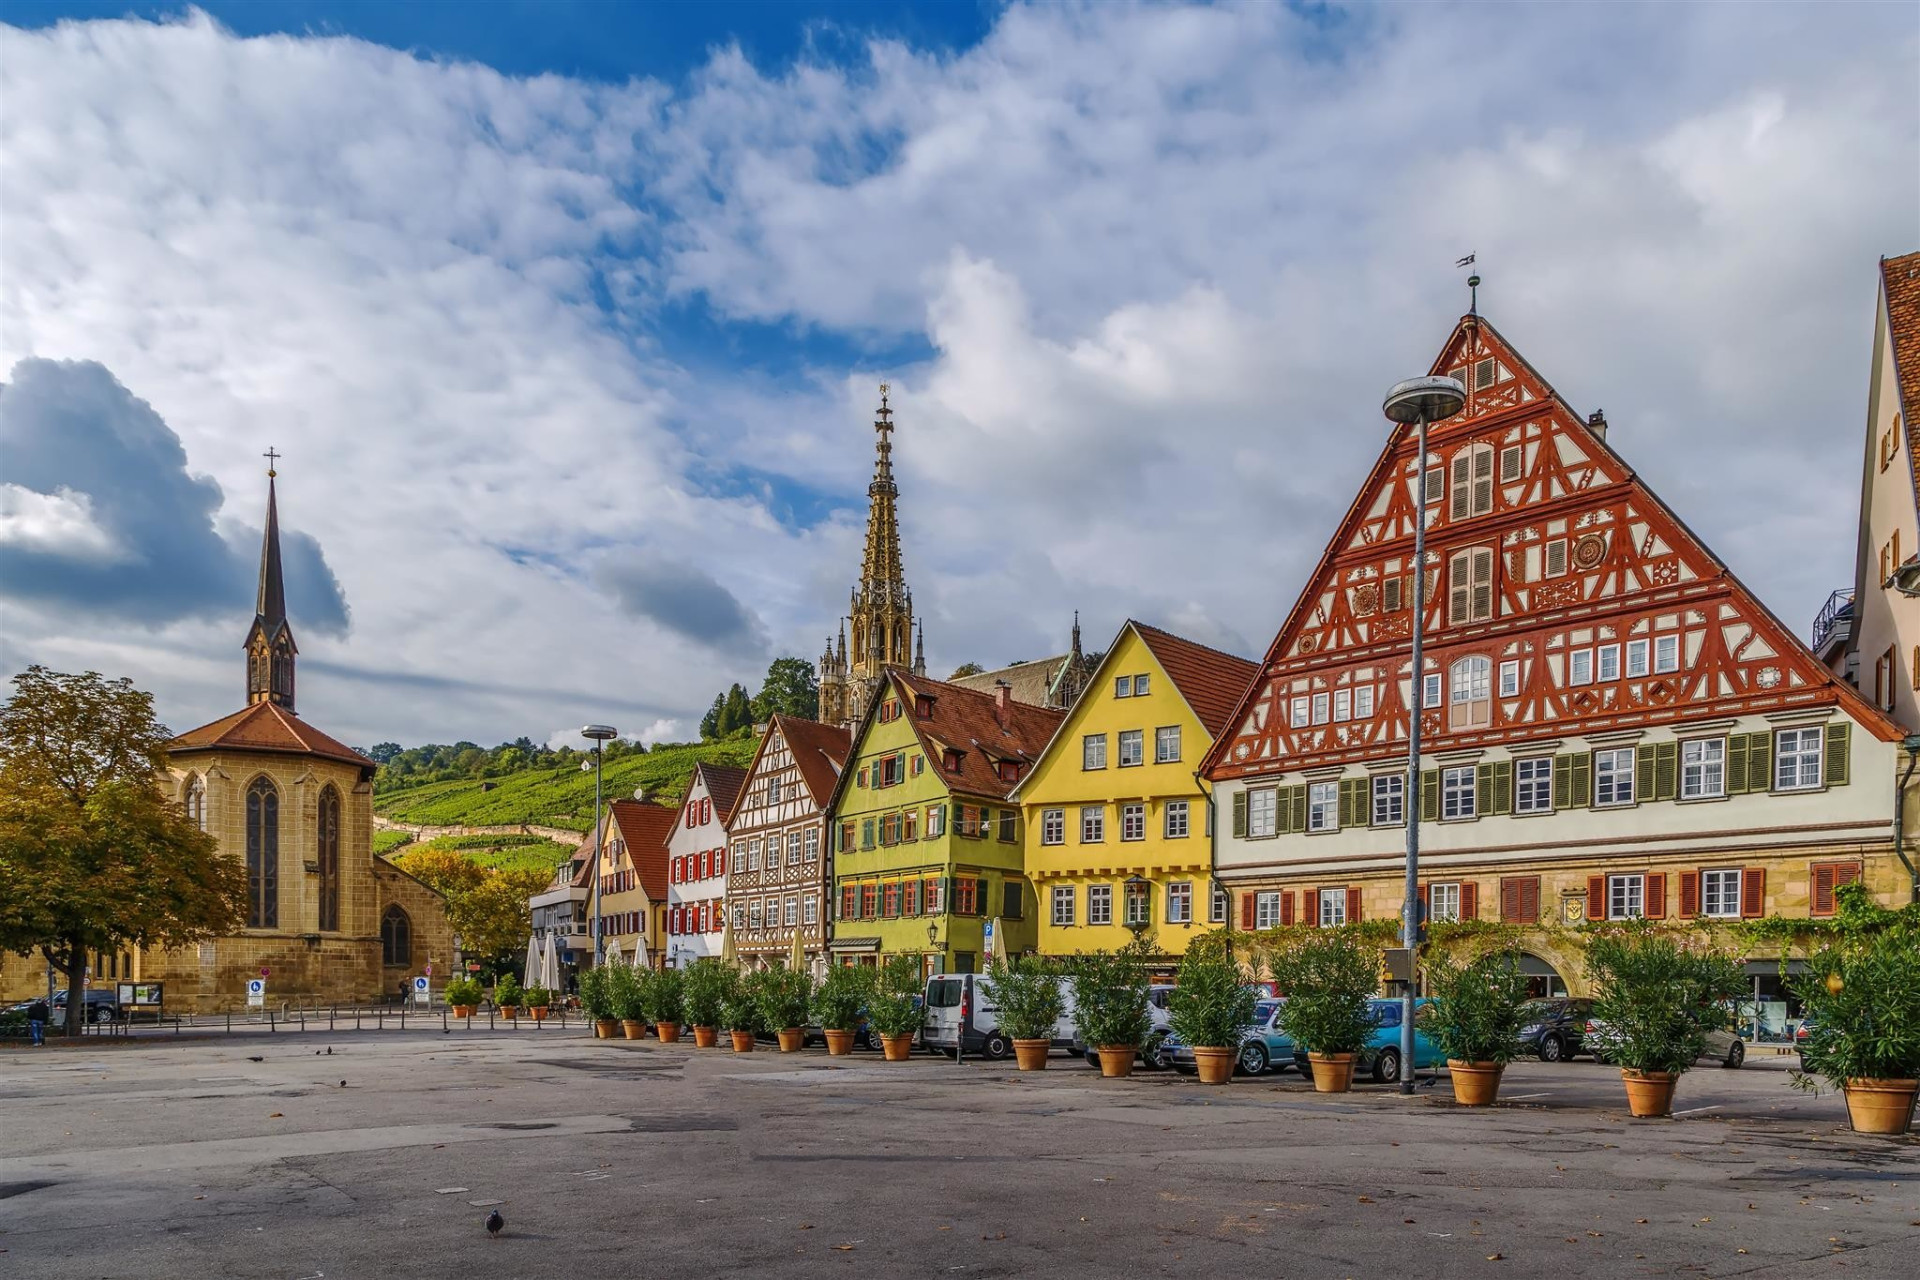 <p>All roads lead to the Marktplatz, the main square where visitors and locals meet up. In addition to the old architecture, the colors of the buildings really draw the eye.</p> <p>See also: <a href="https://www.msn.com/en-au/lifestyle/smart-living/lapland-a-winter-wonderland/ss-BB1bPMOt?li=AAFzCDU"><span>Lapland, a winter wonderland!</span></a></p><p>You may also like:<a href="https://www.starsinsider.com/n/340245?utm_source=msn.com&utm_medium=display&utm_campaign=referral_description&utm_content=208346v2en-sg"> The final goodbye to our beloved pets</a></p>